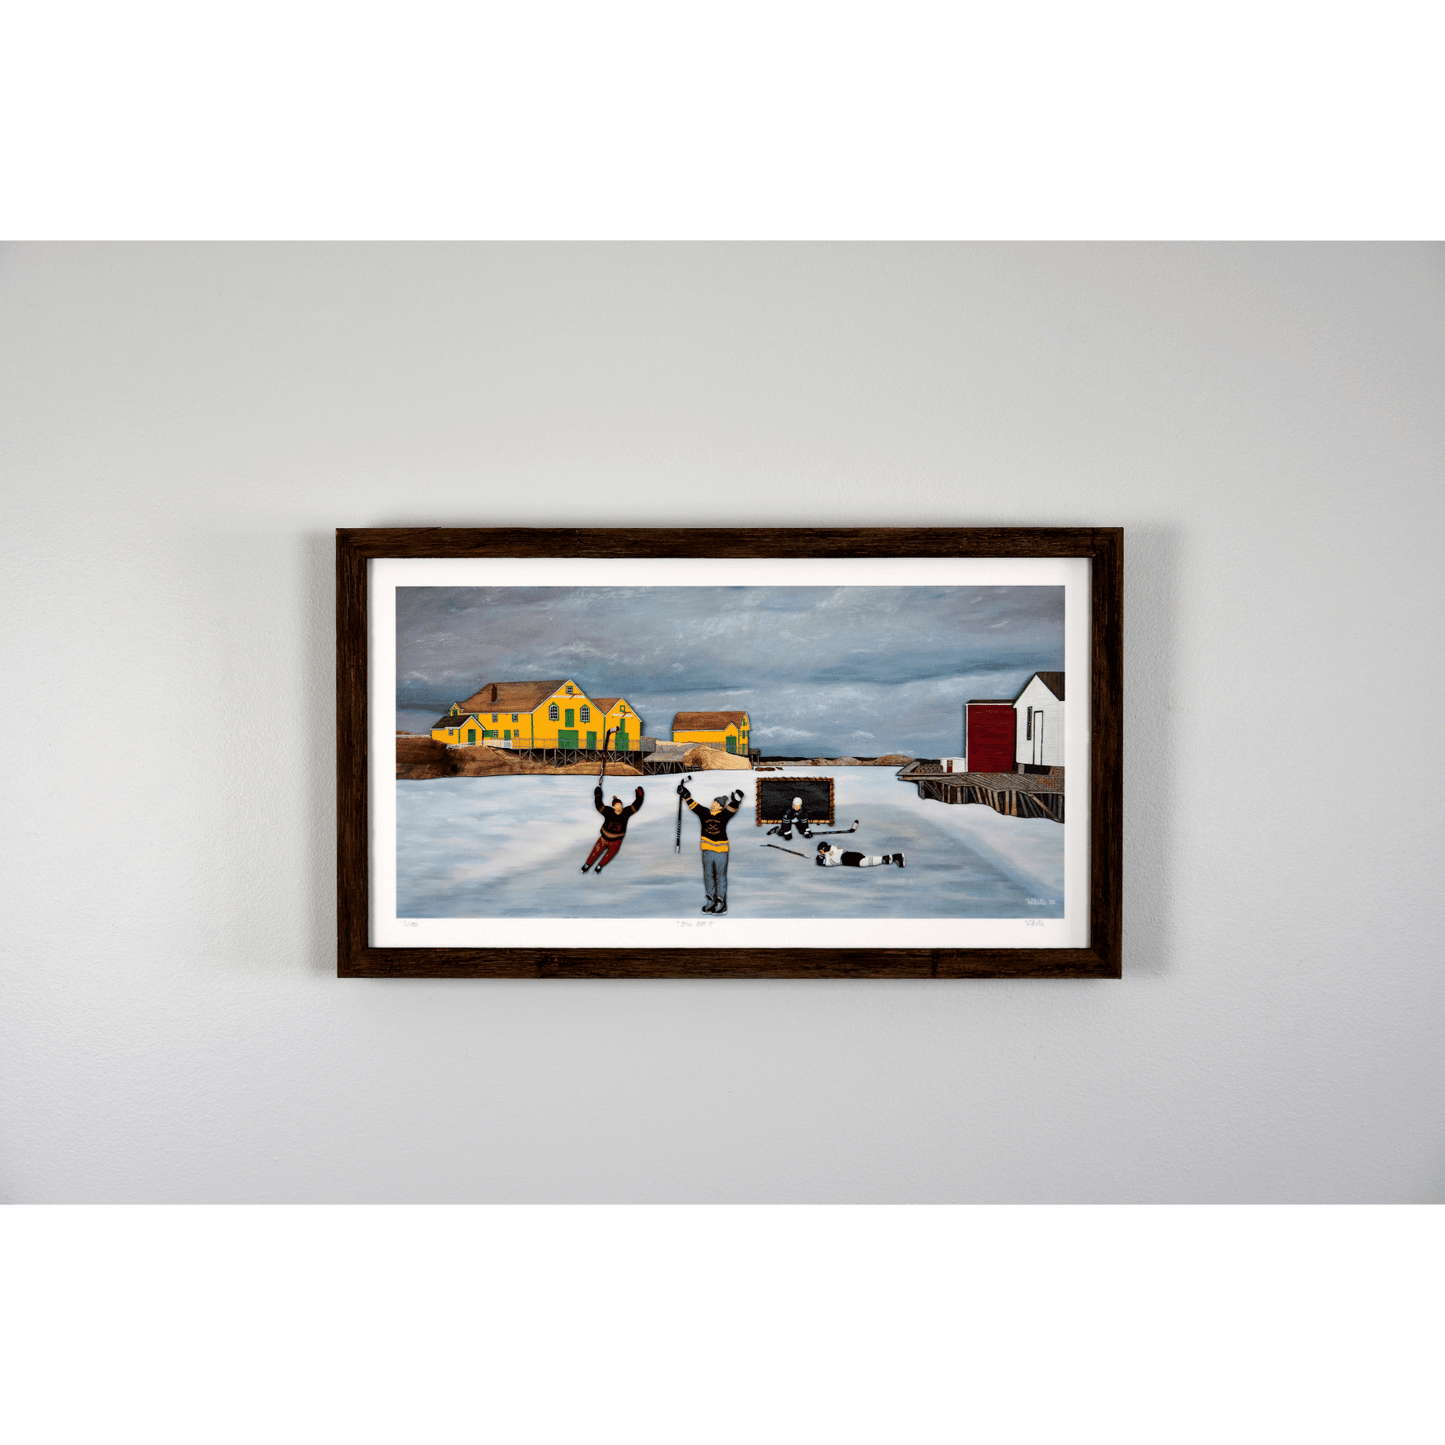 Experience the joy of winter in rural Newfoundland with "Still Got It" print. This reproduction features people playing hockey outside.